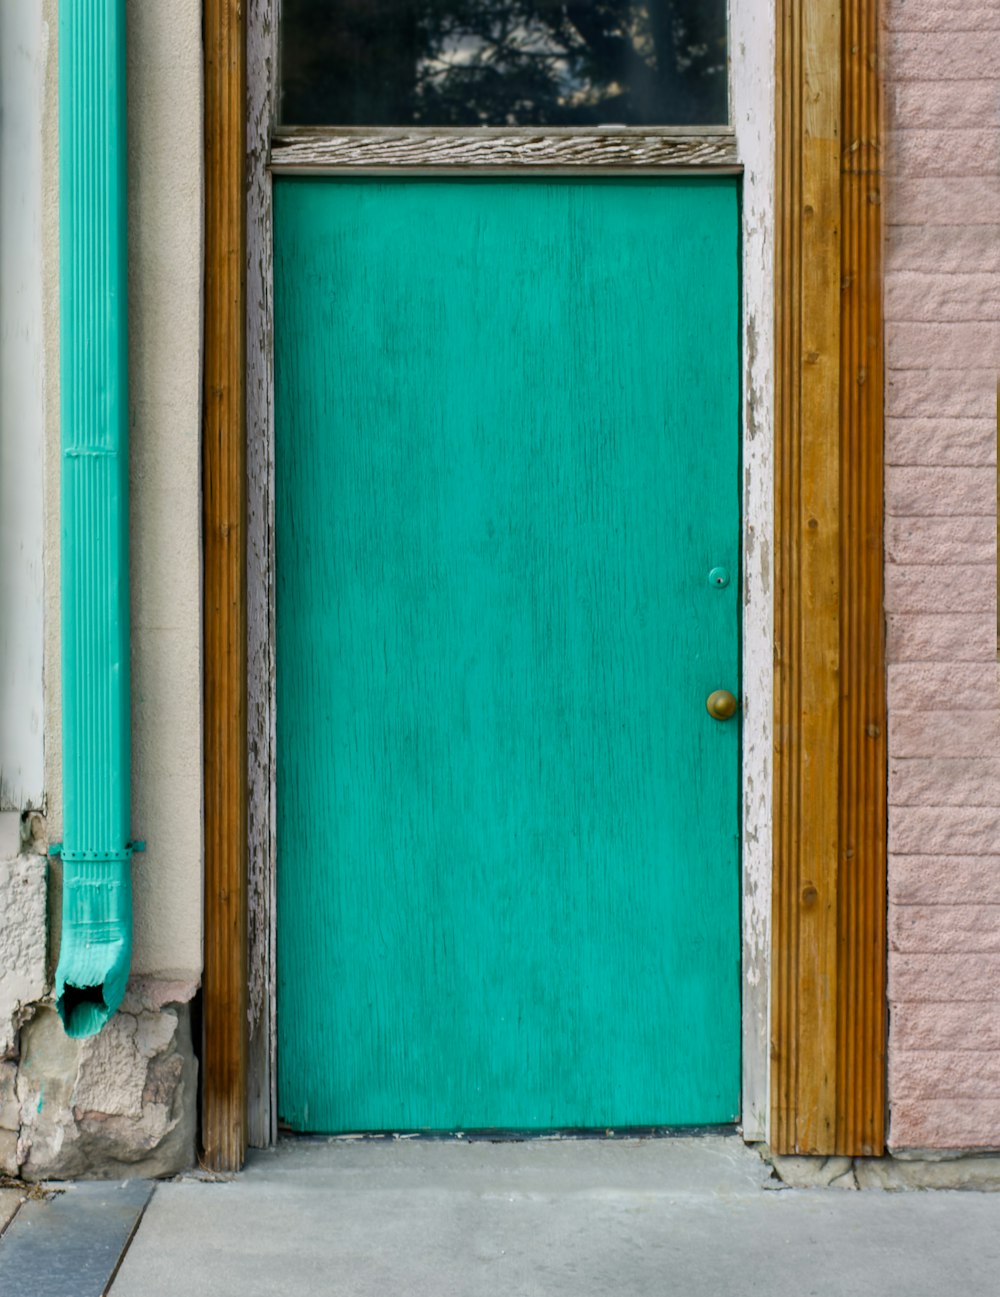 a green door with a wooden frame in front of a brick building